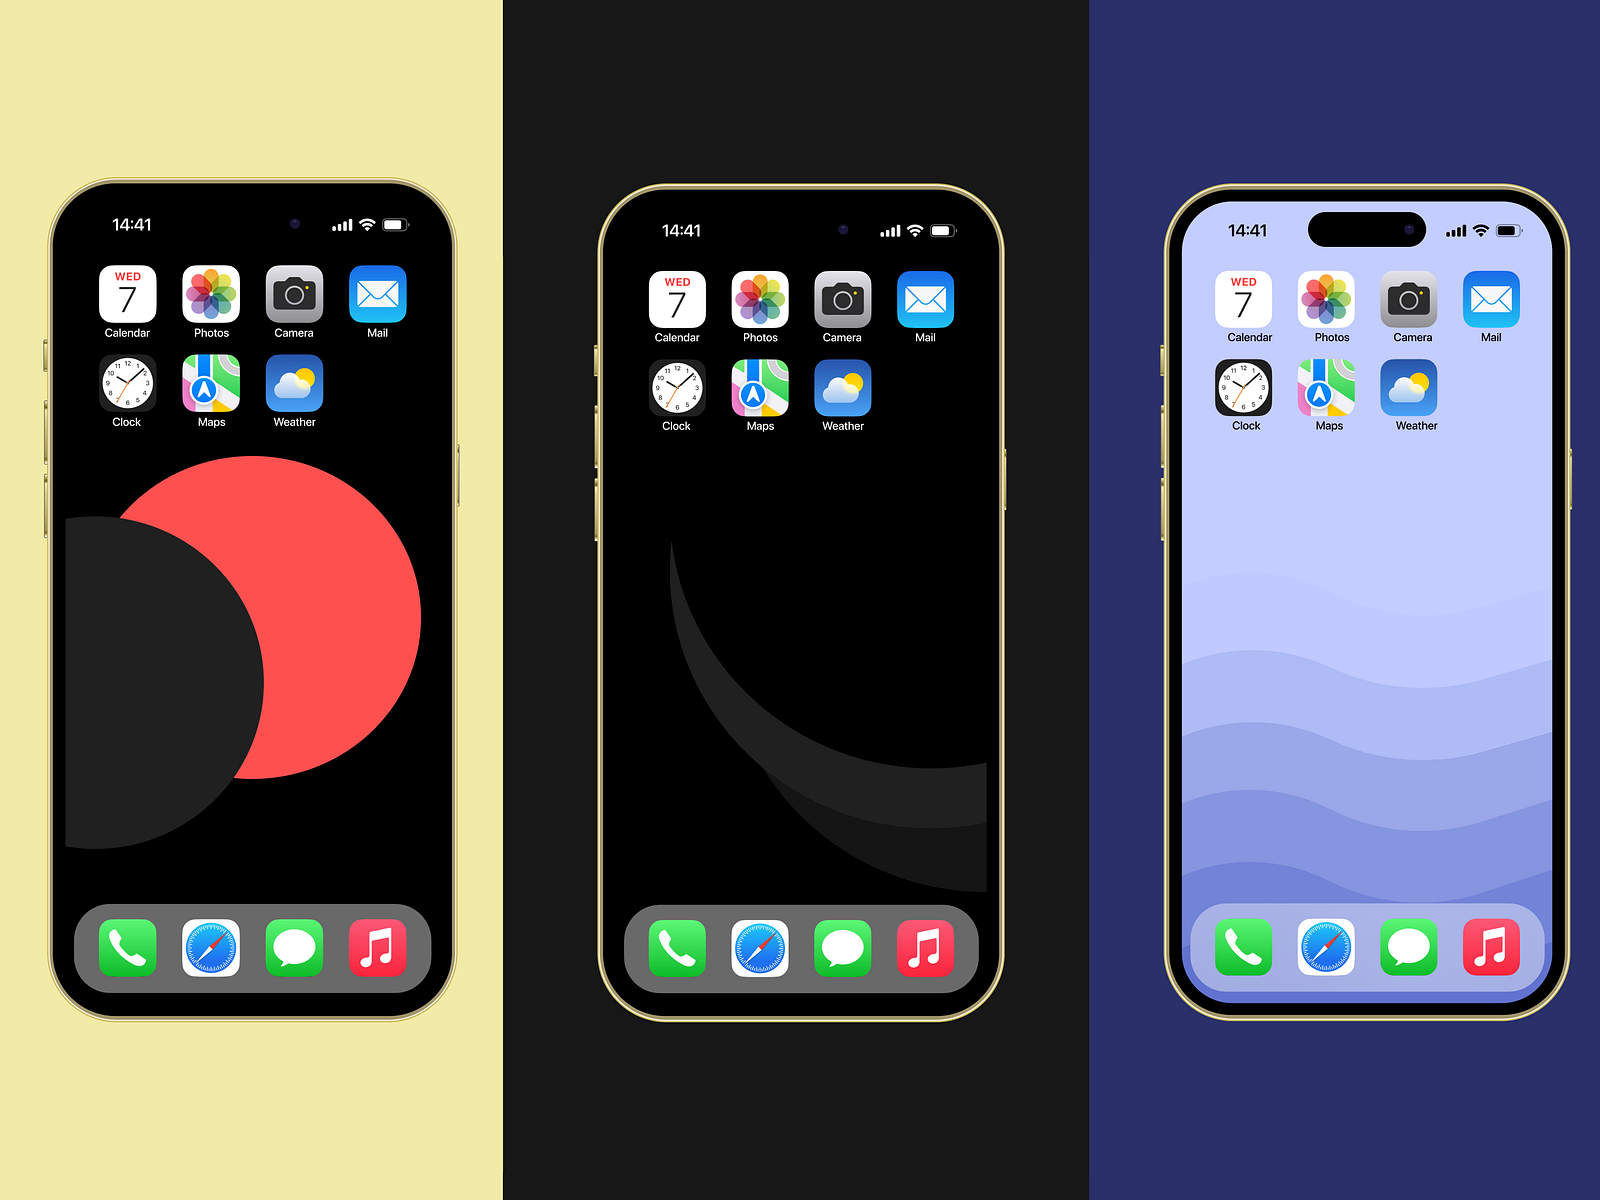 Wallpapers made in Figma by Rajat on Dribbble